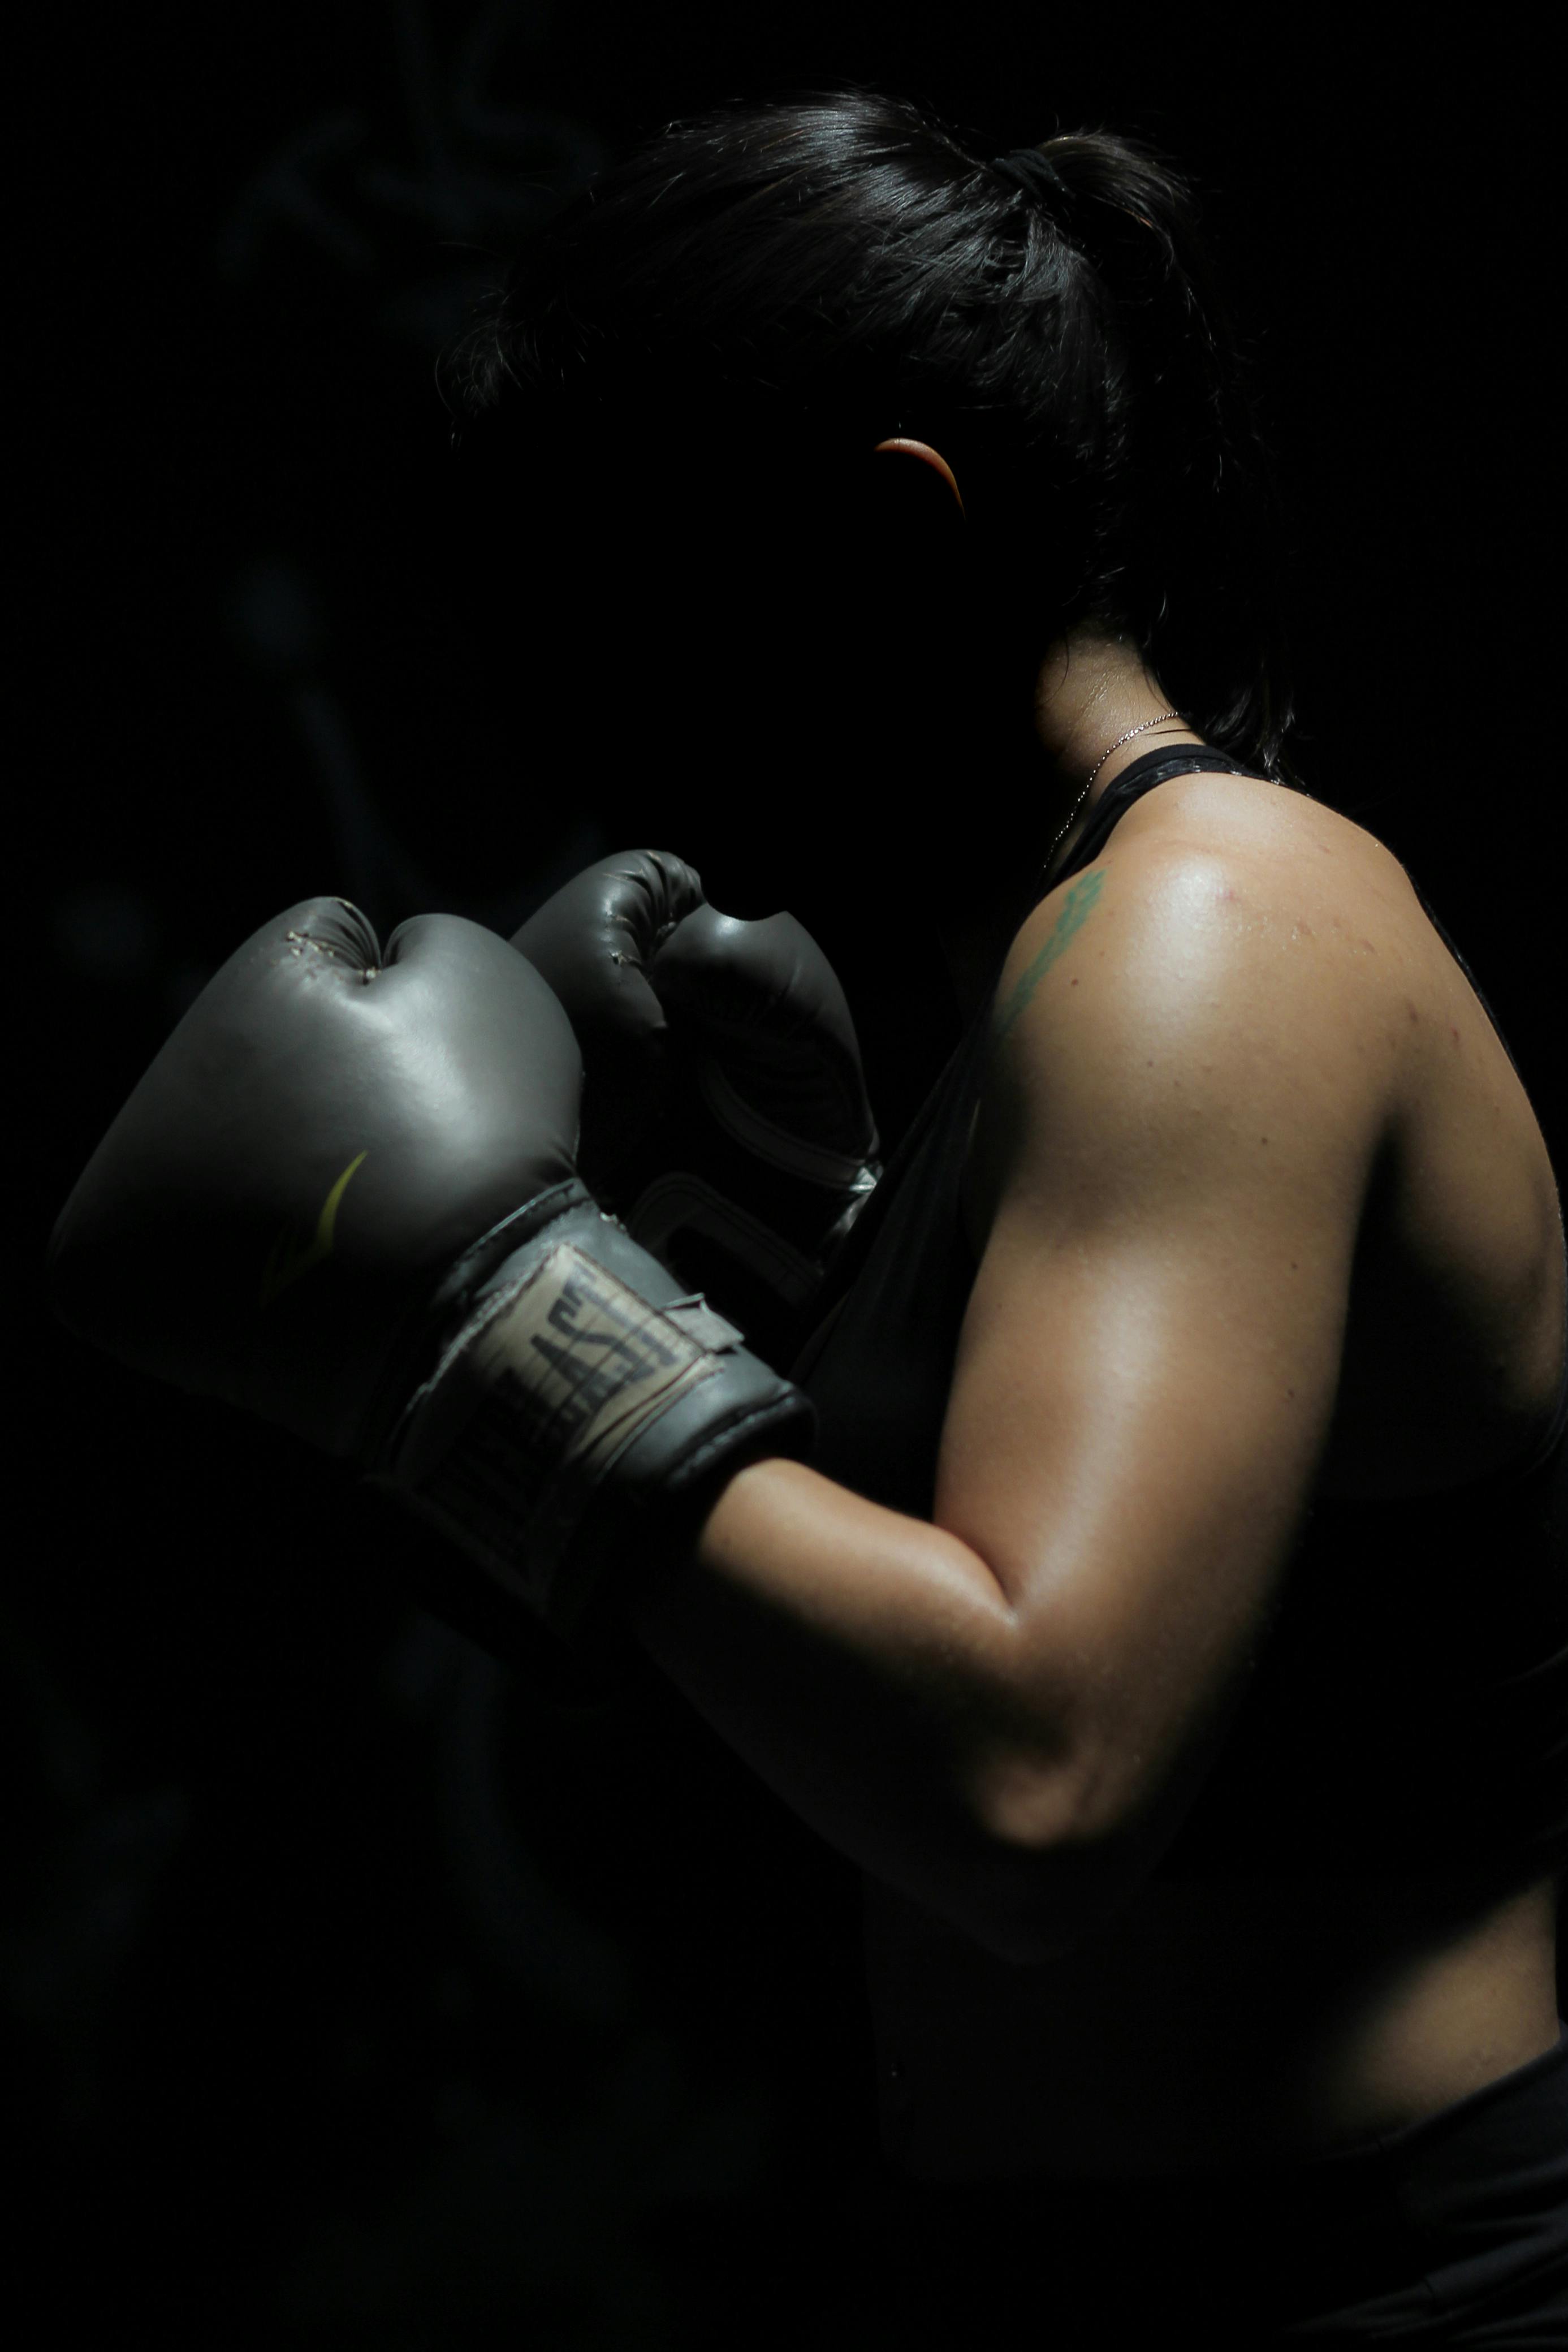 Boxing Gloves Photos, Download The BEST Free Boxing Gloves Stock Photos &  HD Images